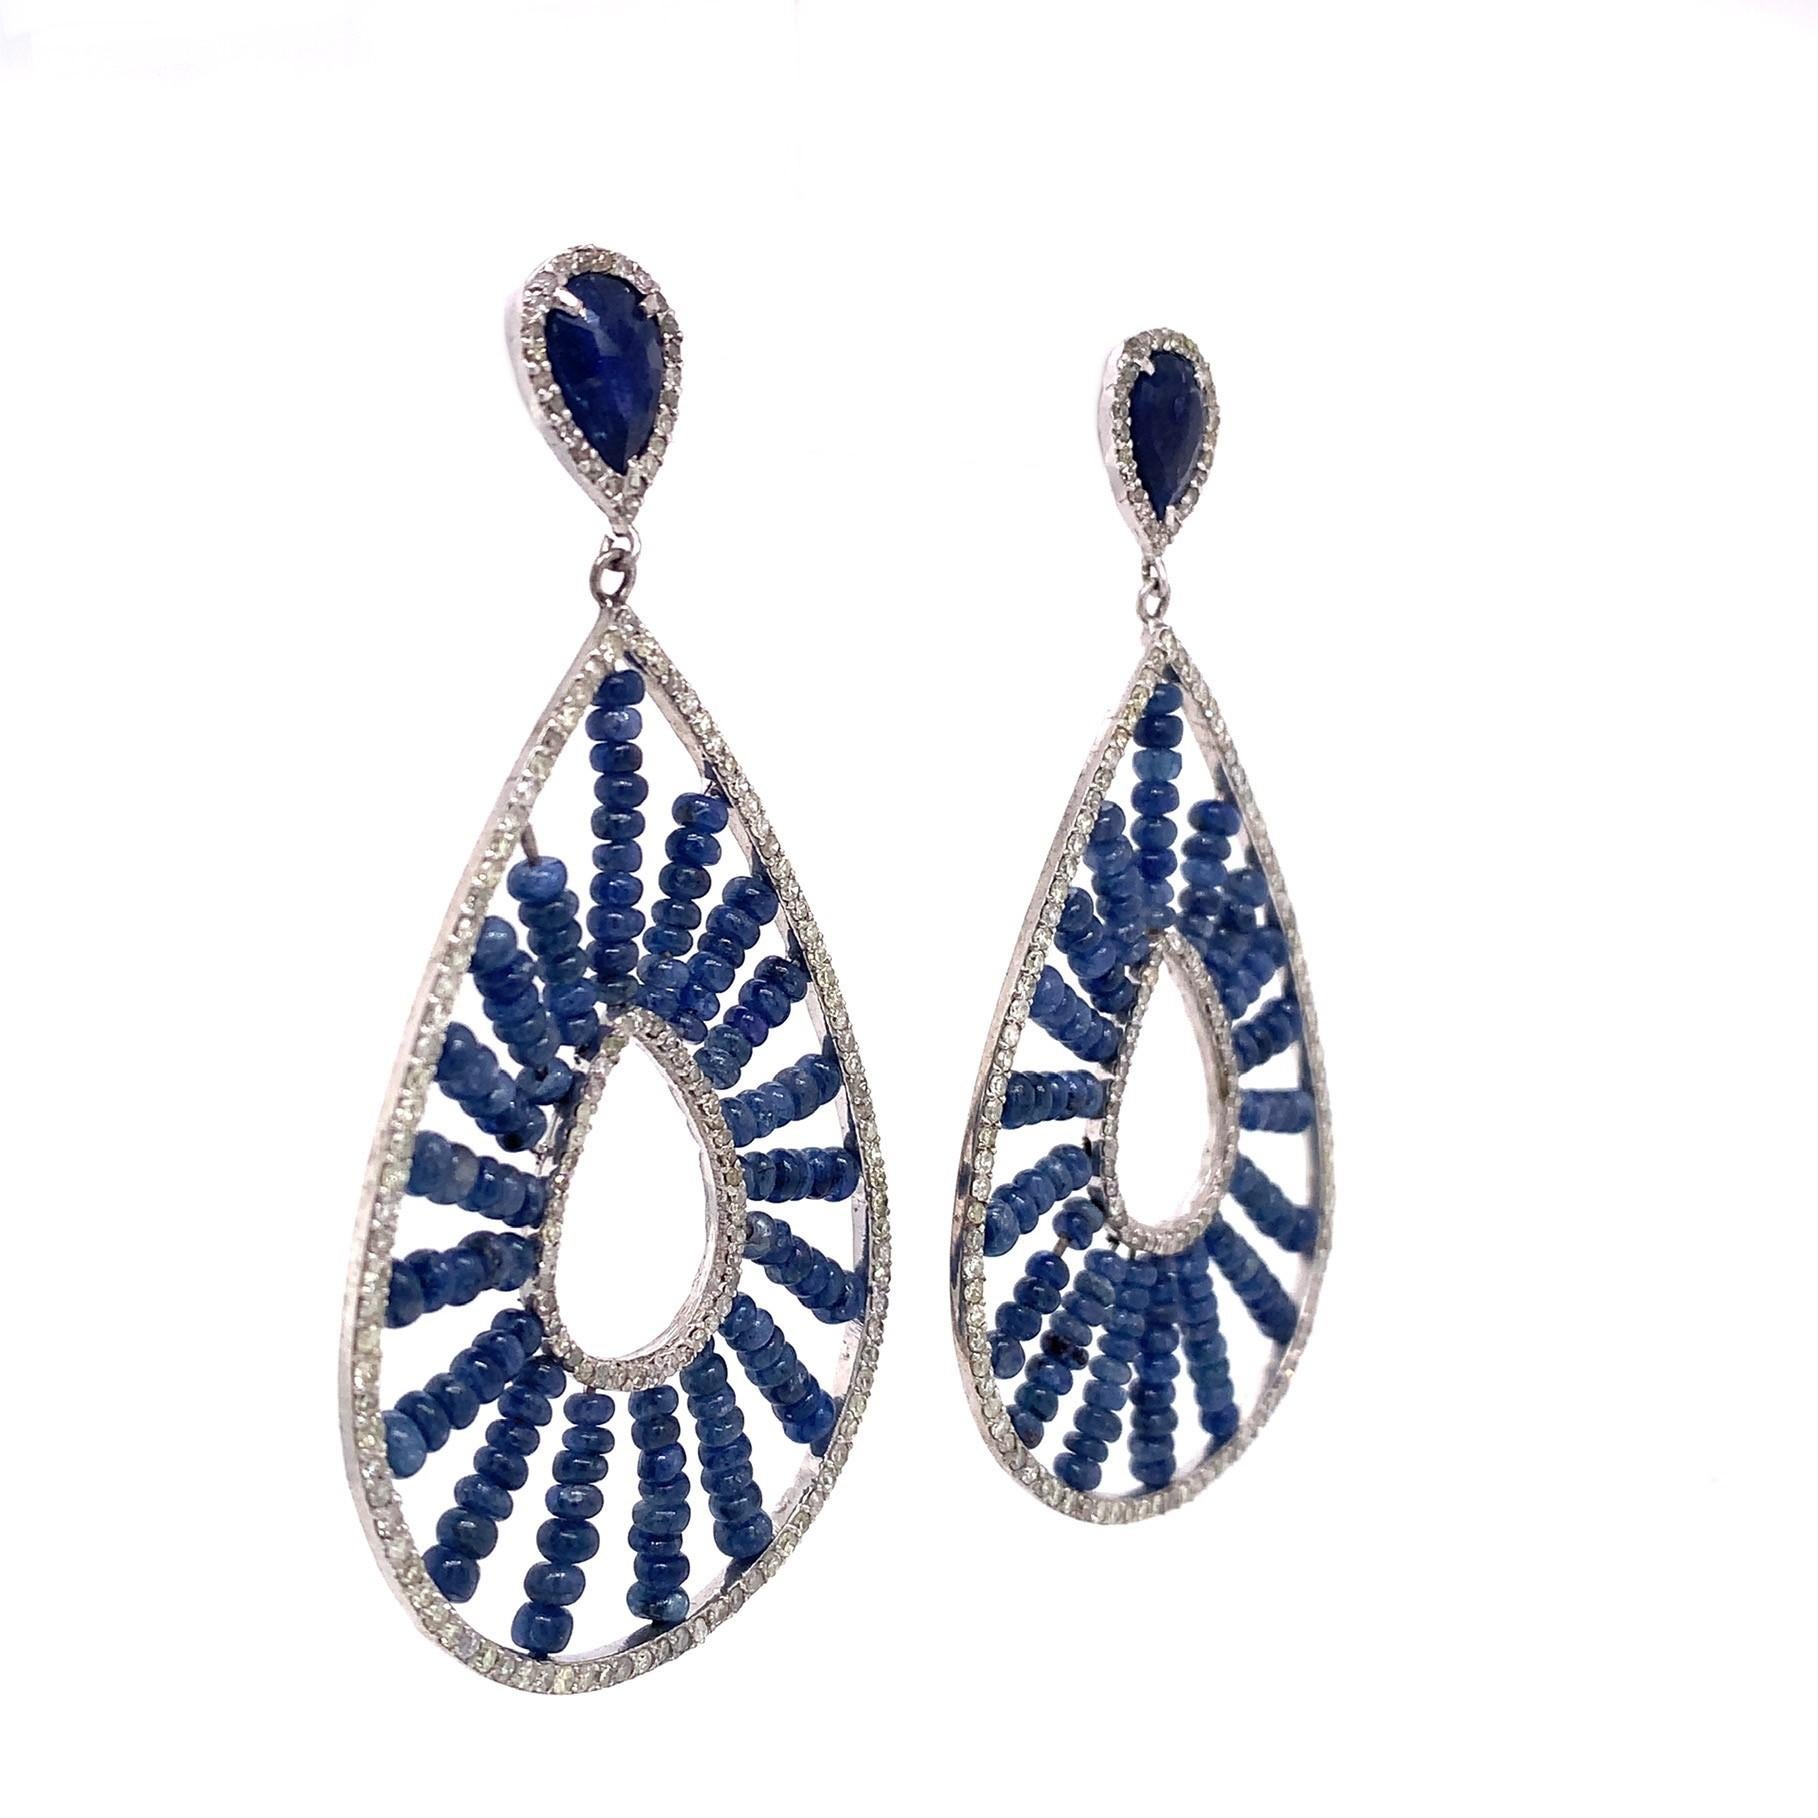 Life in color Collection

Several beads of Blue Sapphire swirl motifs in a pear shape diamonds frame set in Sterling Silver.

Blue Sapphire: 30.25ct total weight.
Diamond: 3.39ct total weight.